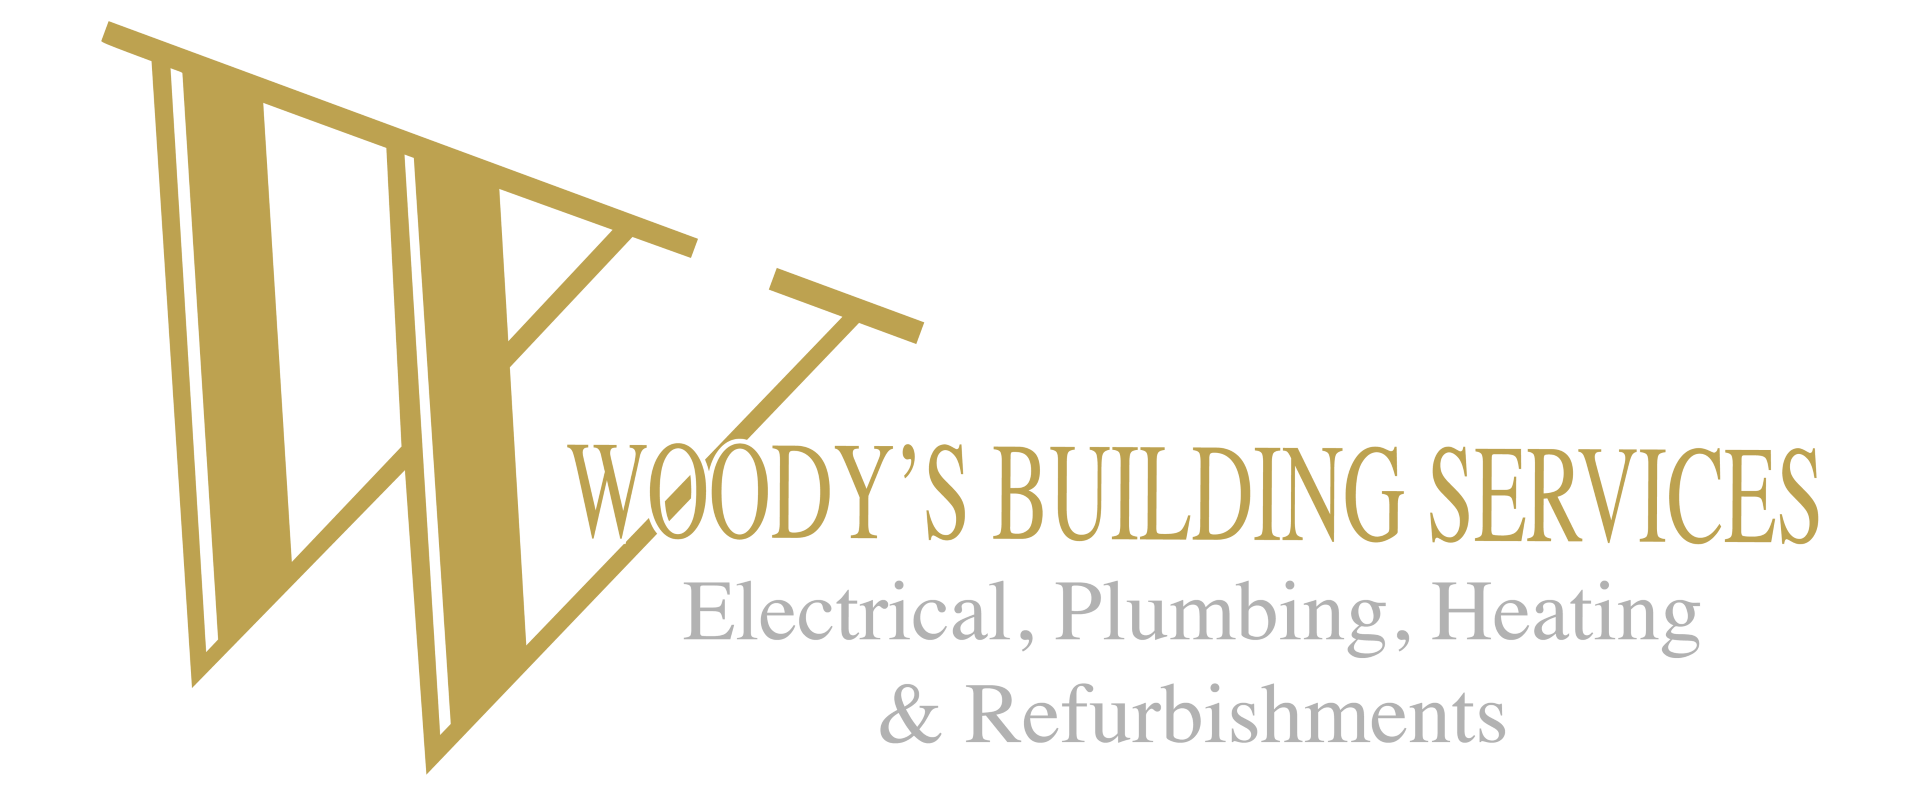 woodys building services logo